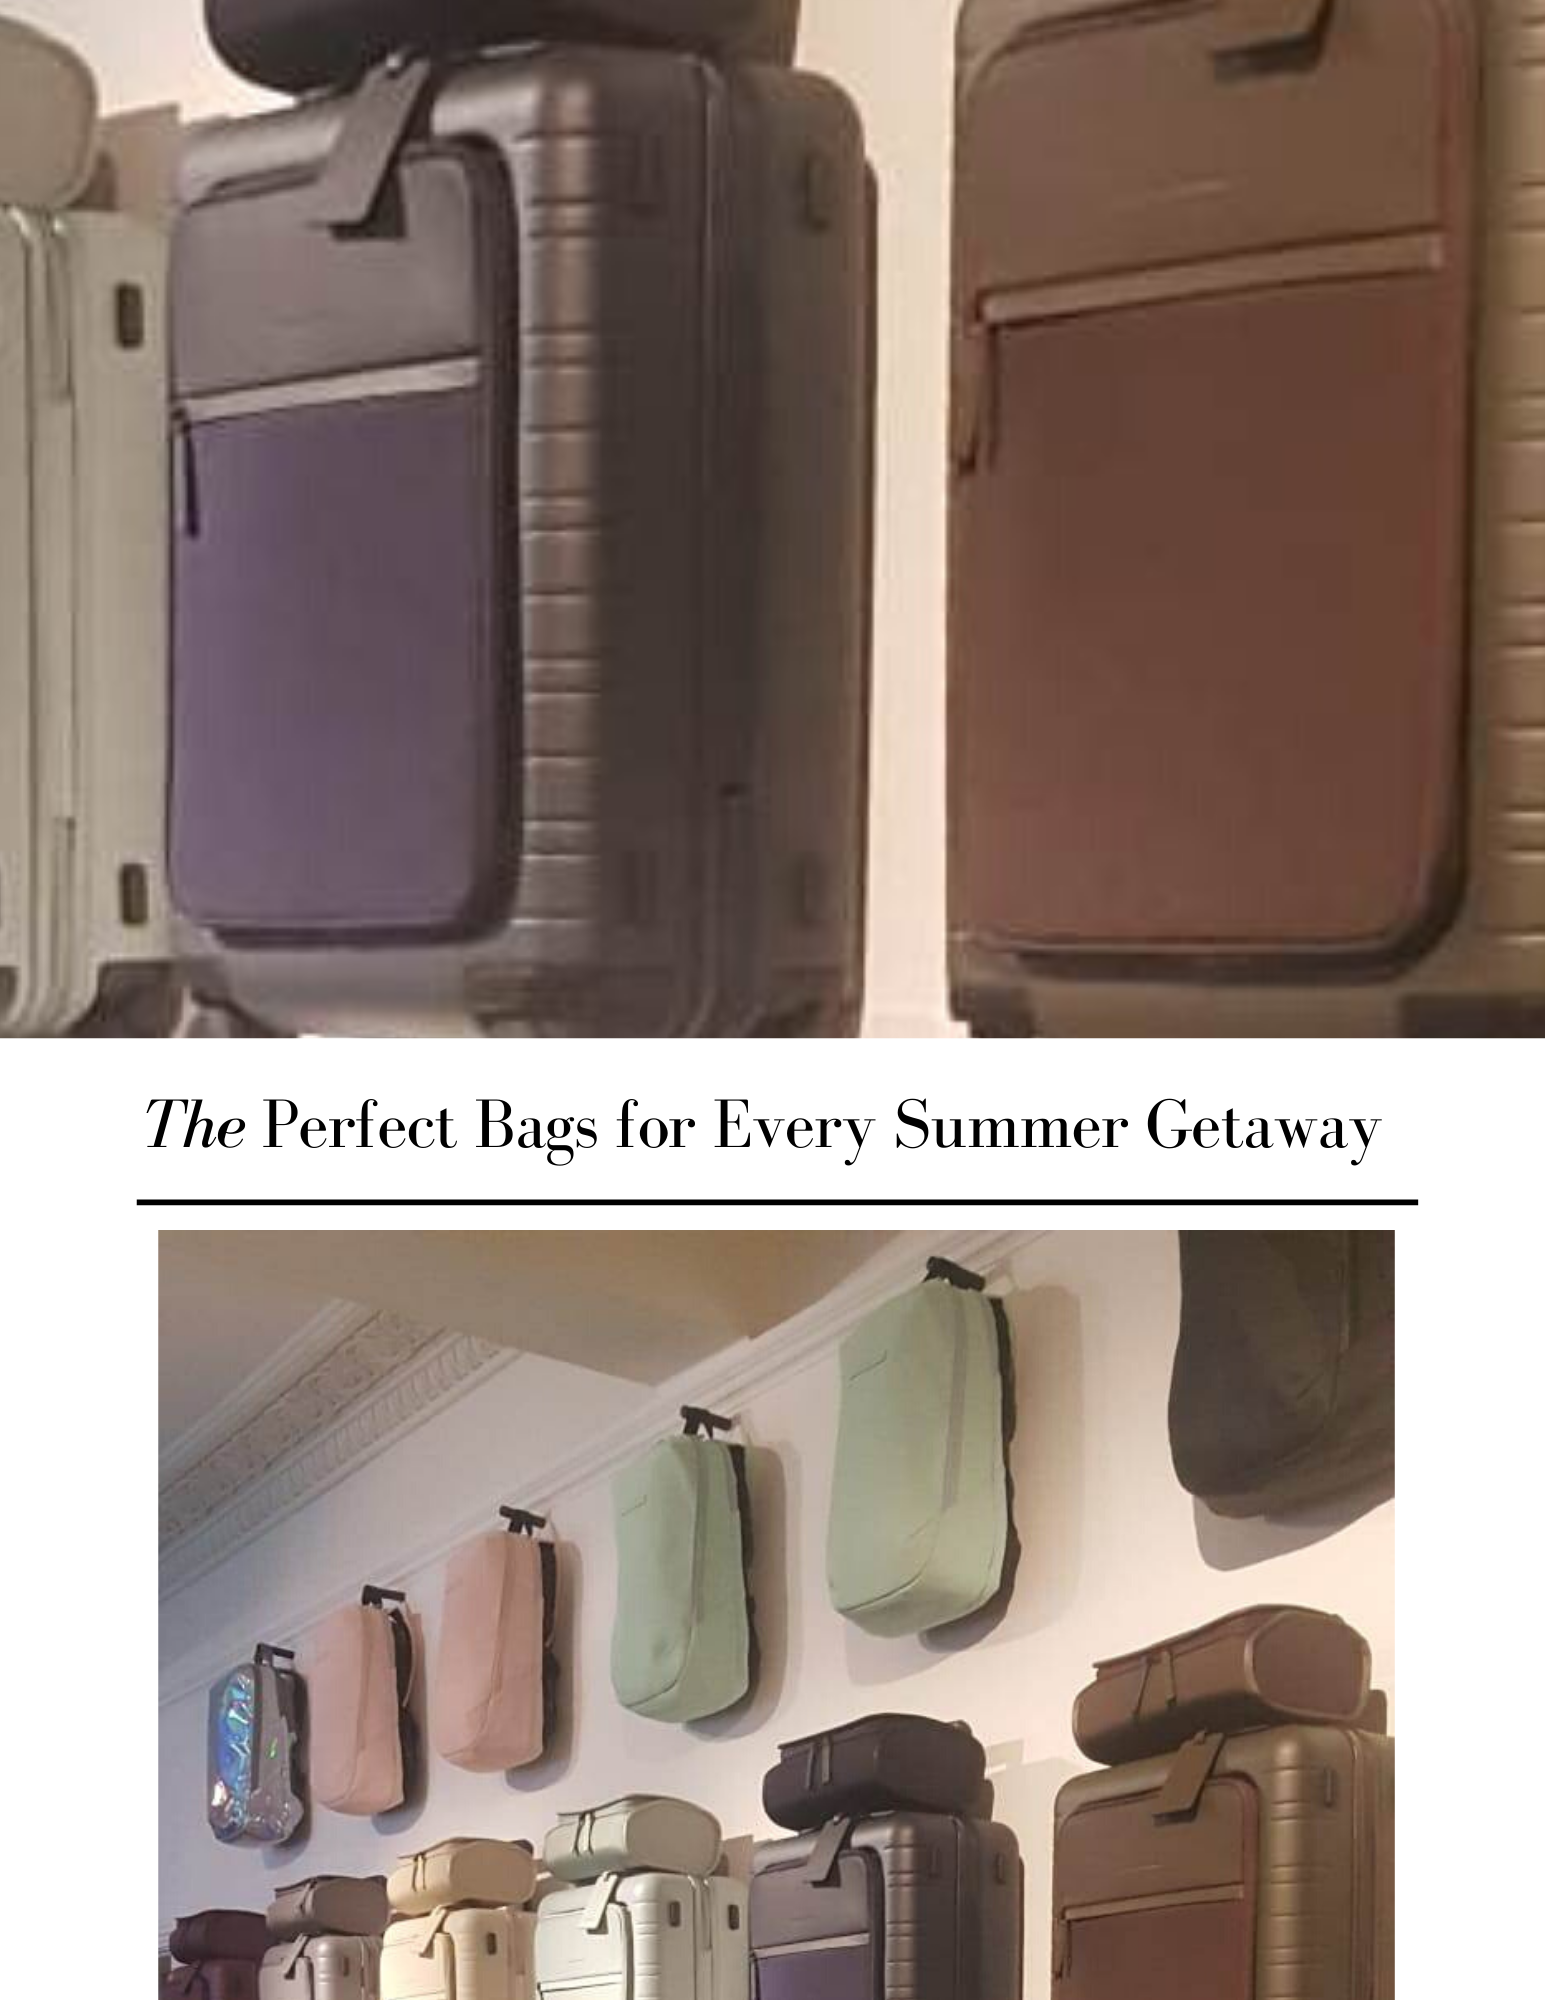 Luxury Luggage Brands for Men